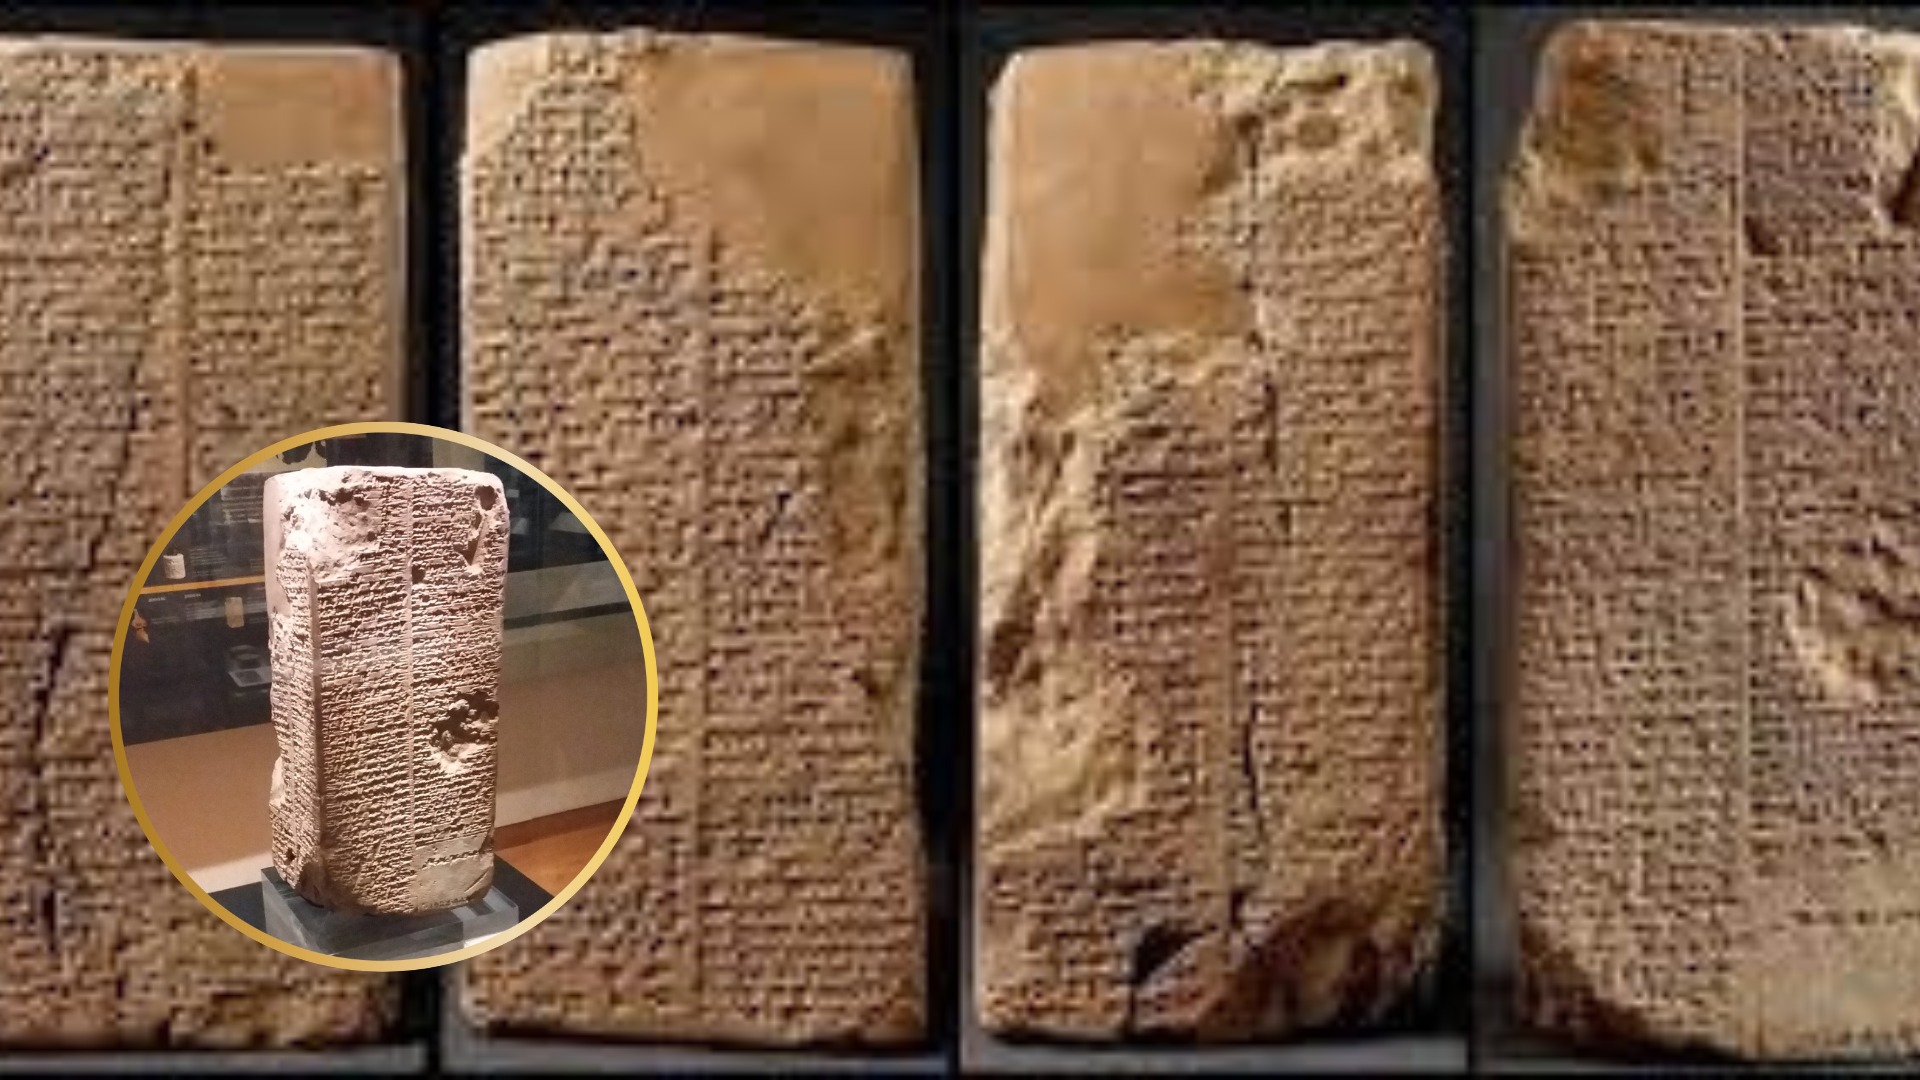 Sumerian Kings: The Gods Who Came Down from Heaven to Rule the Earth